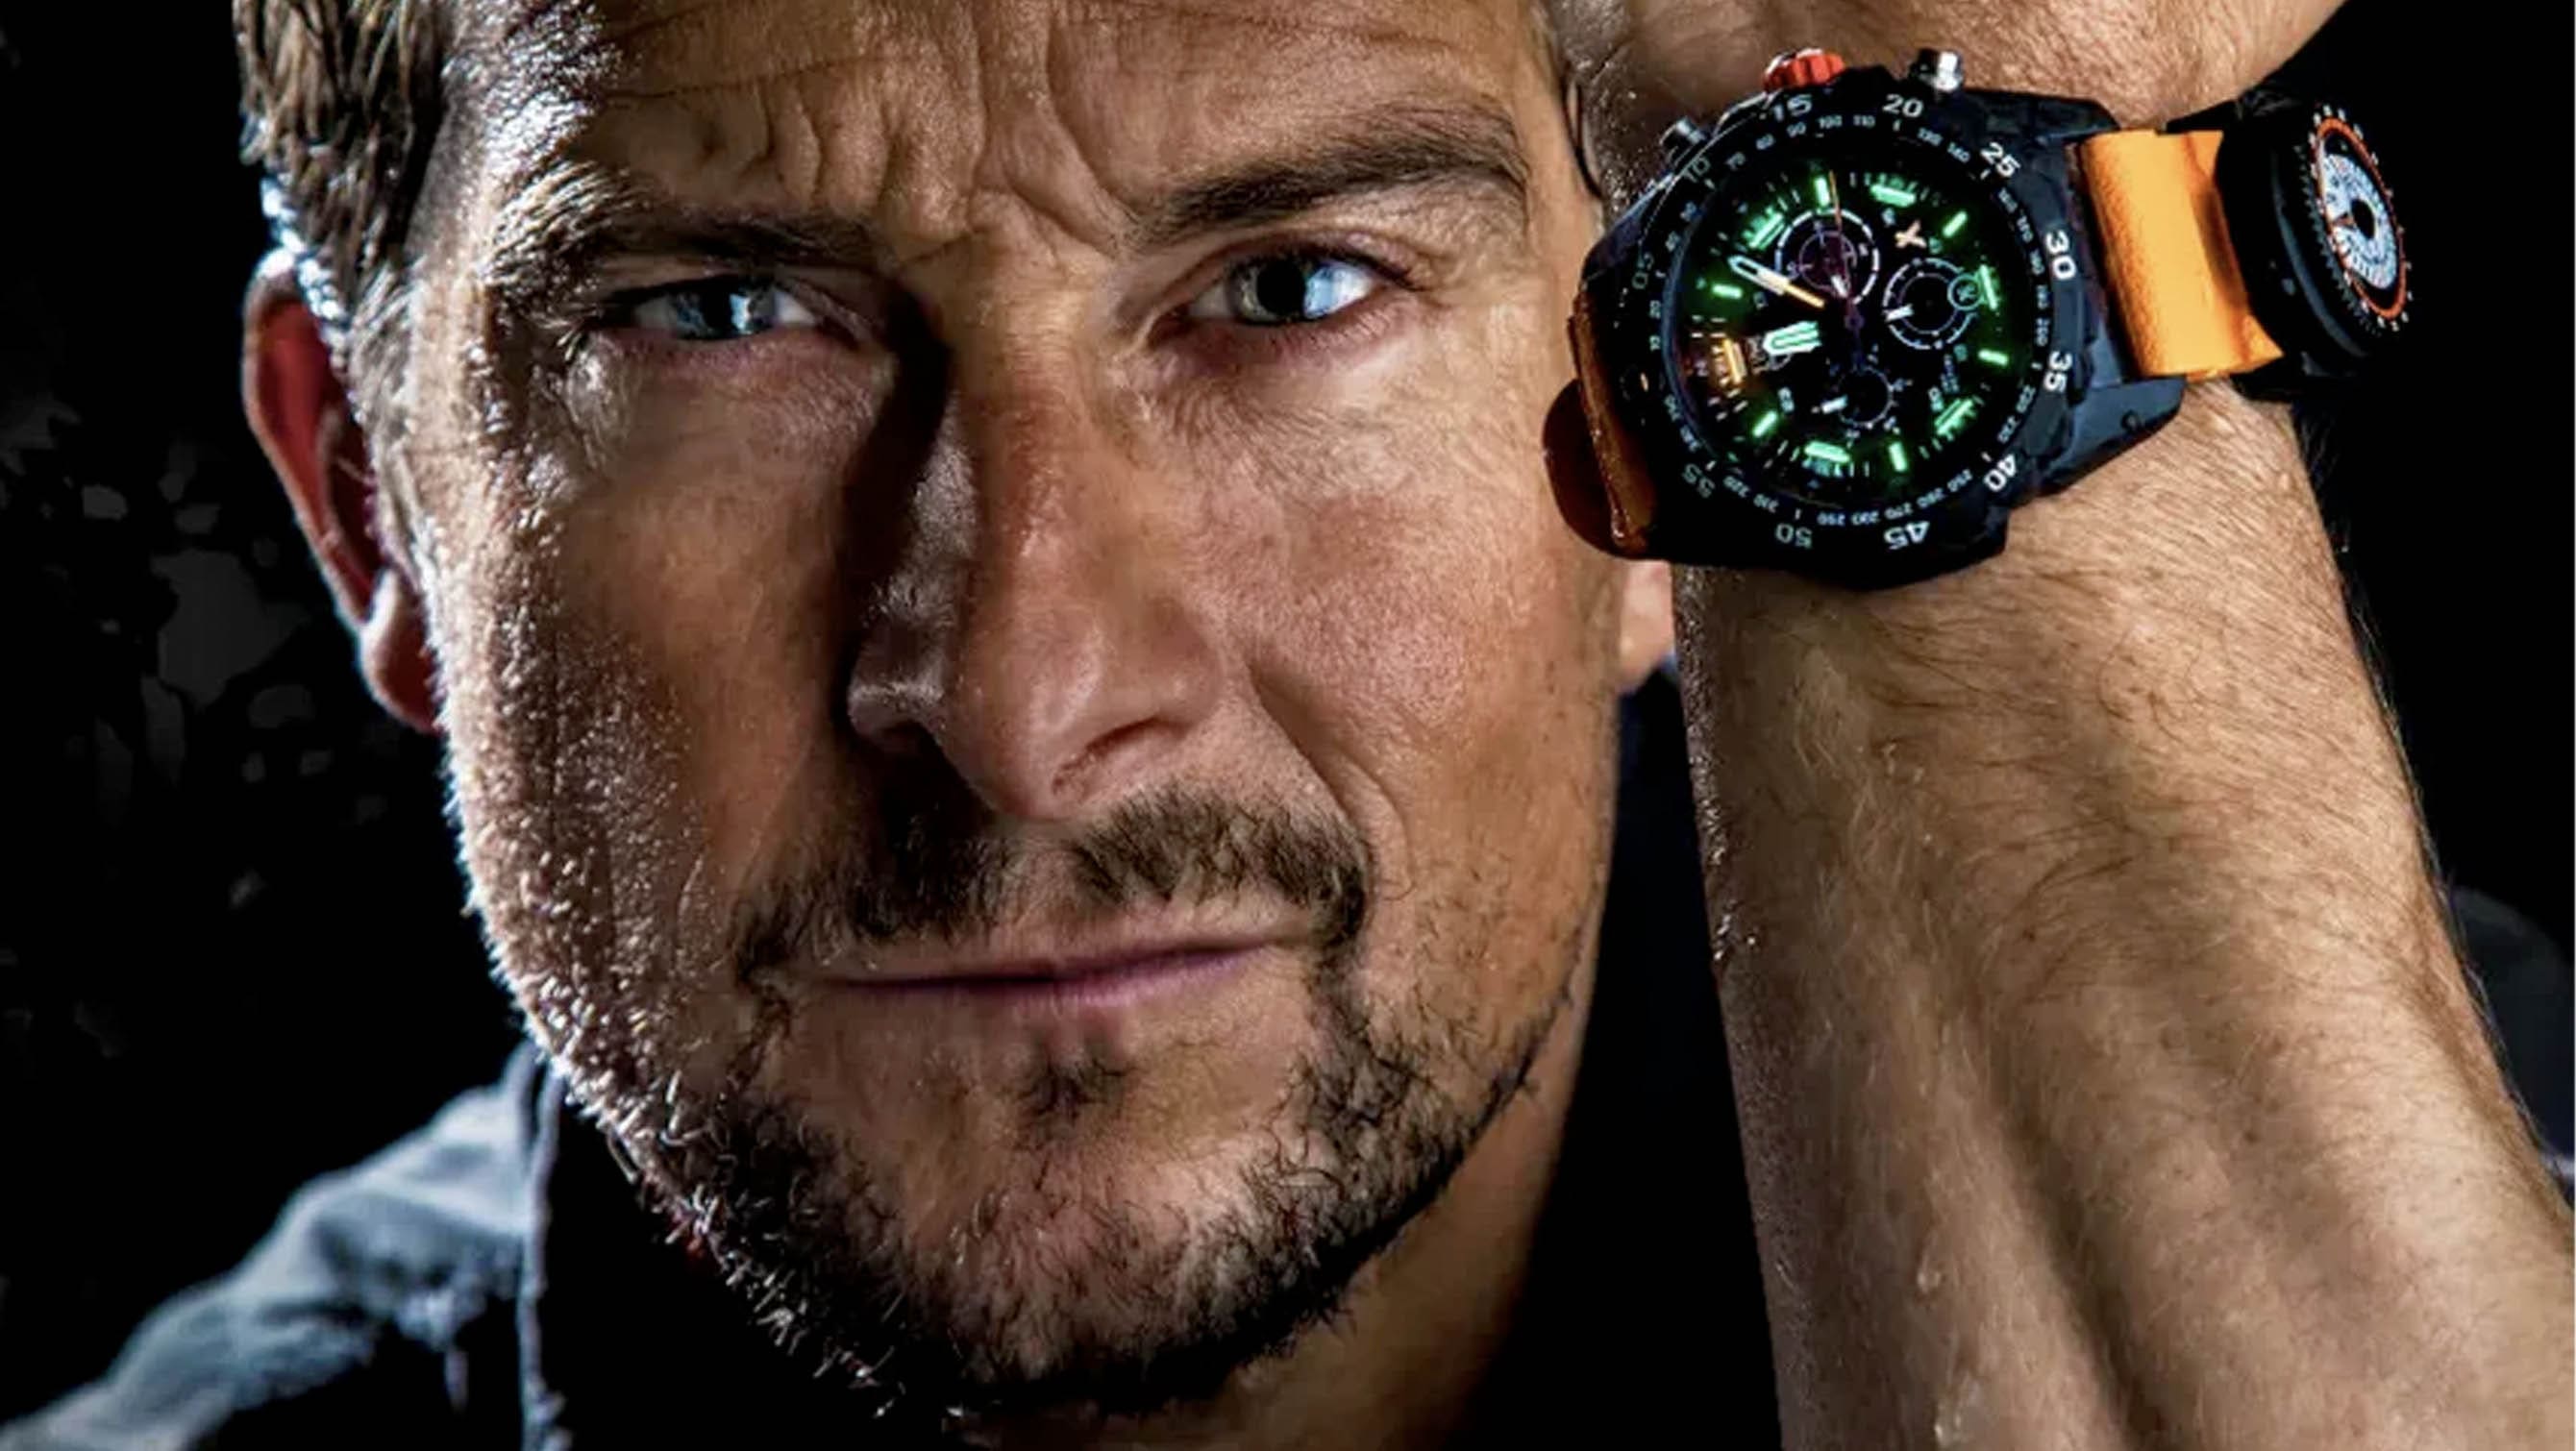 5 of the best survival watches